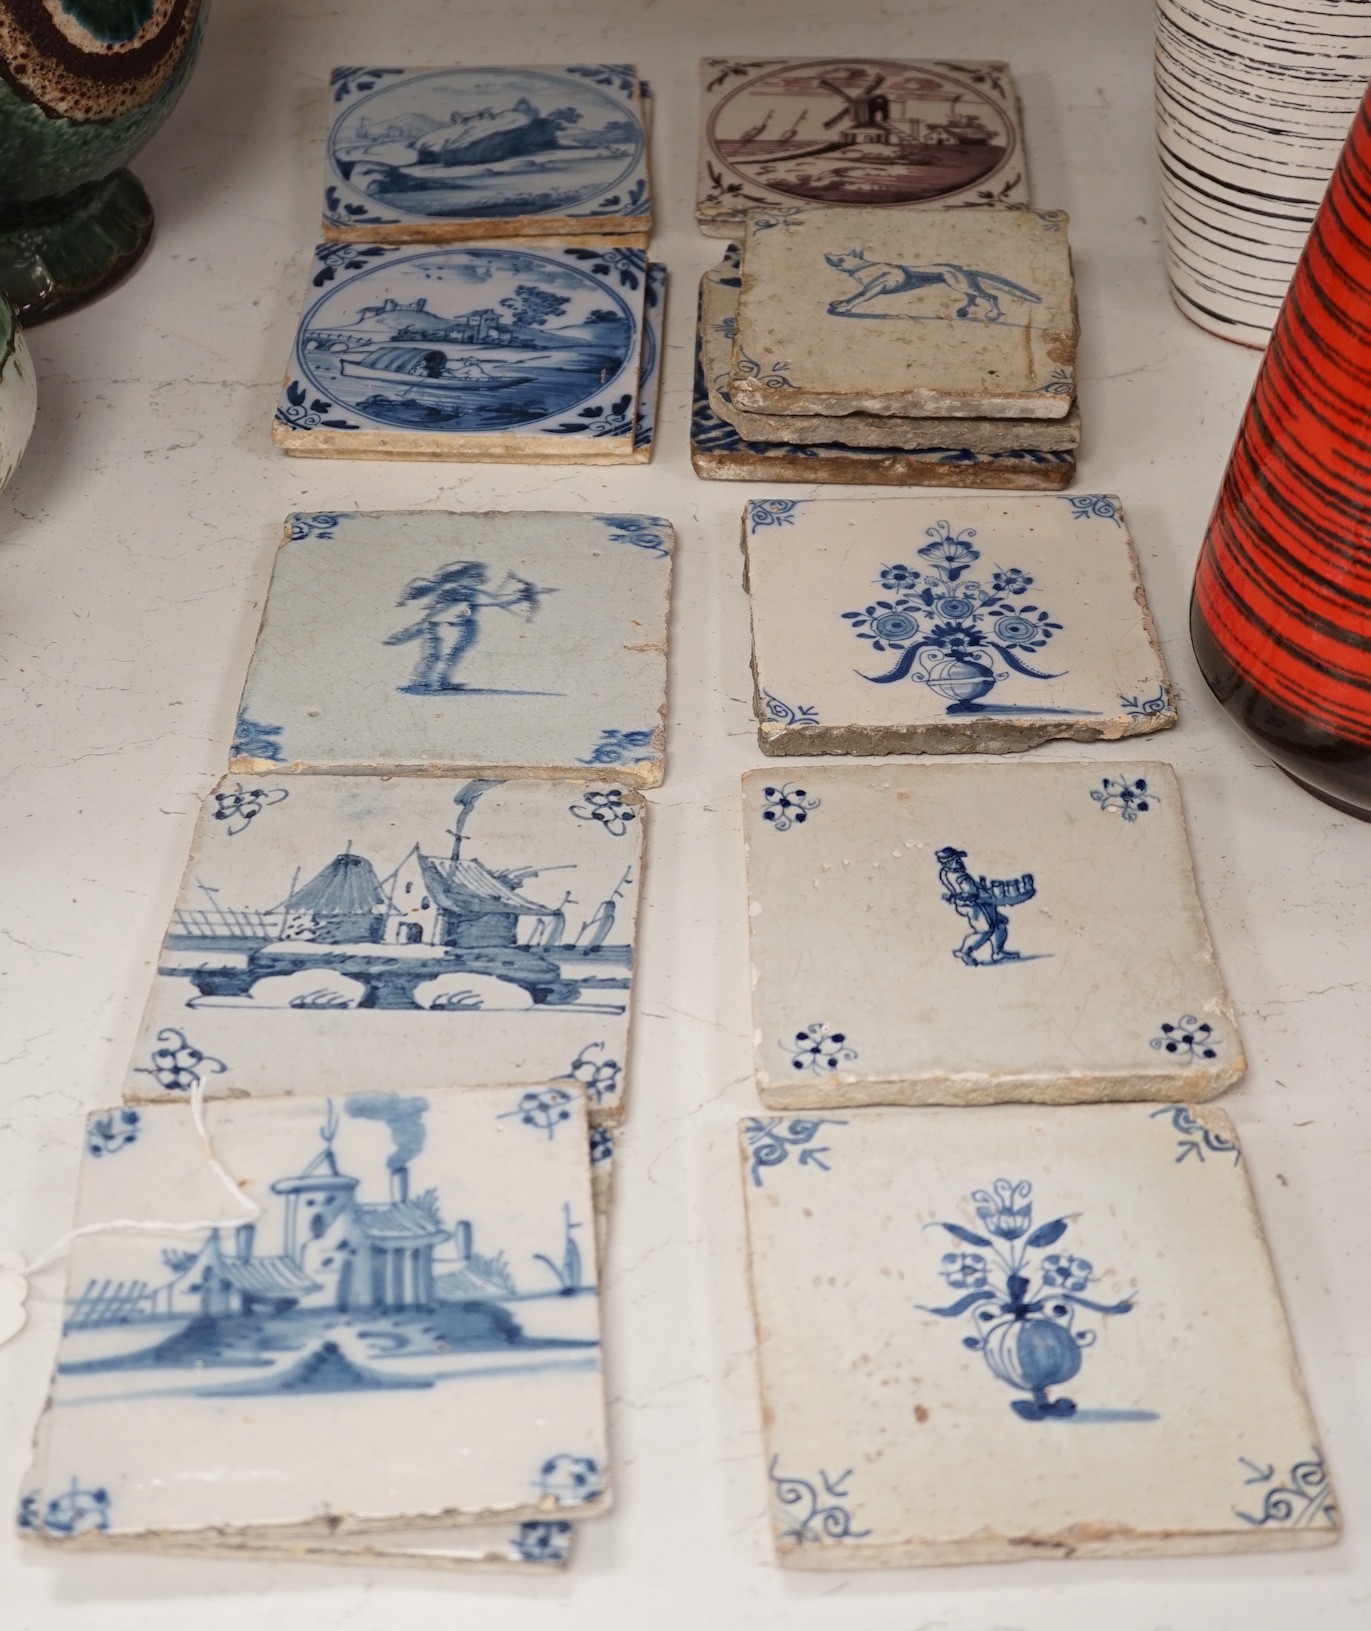 Sixteen Delft tiles from the 17th to 19th century